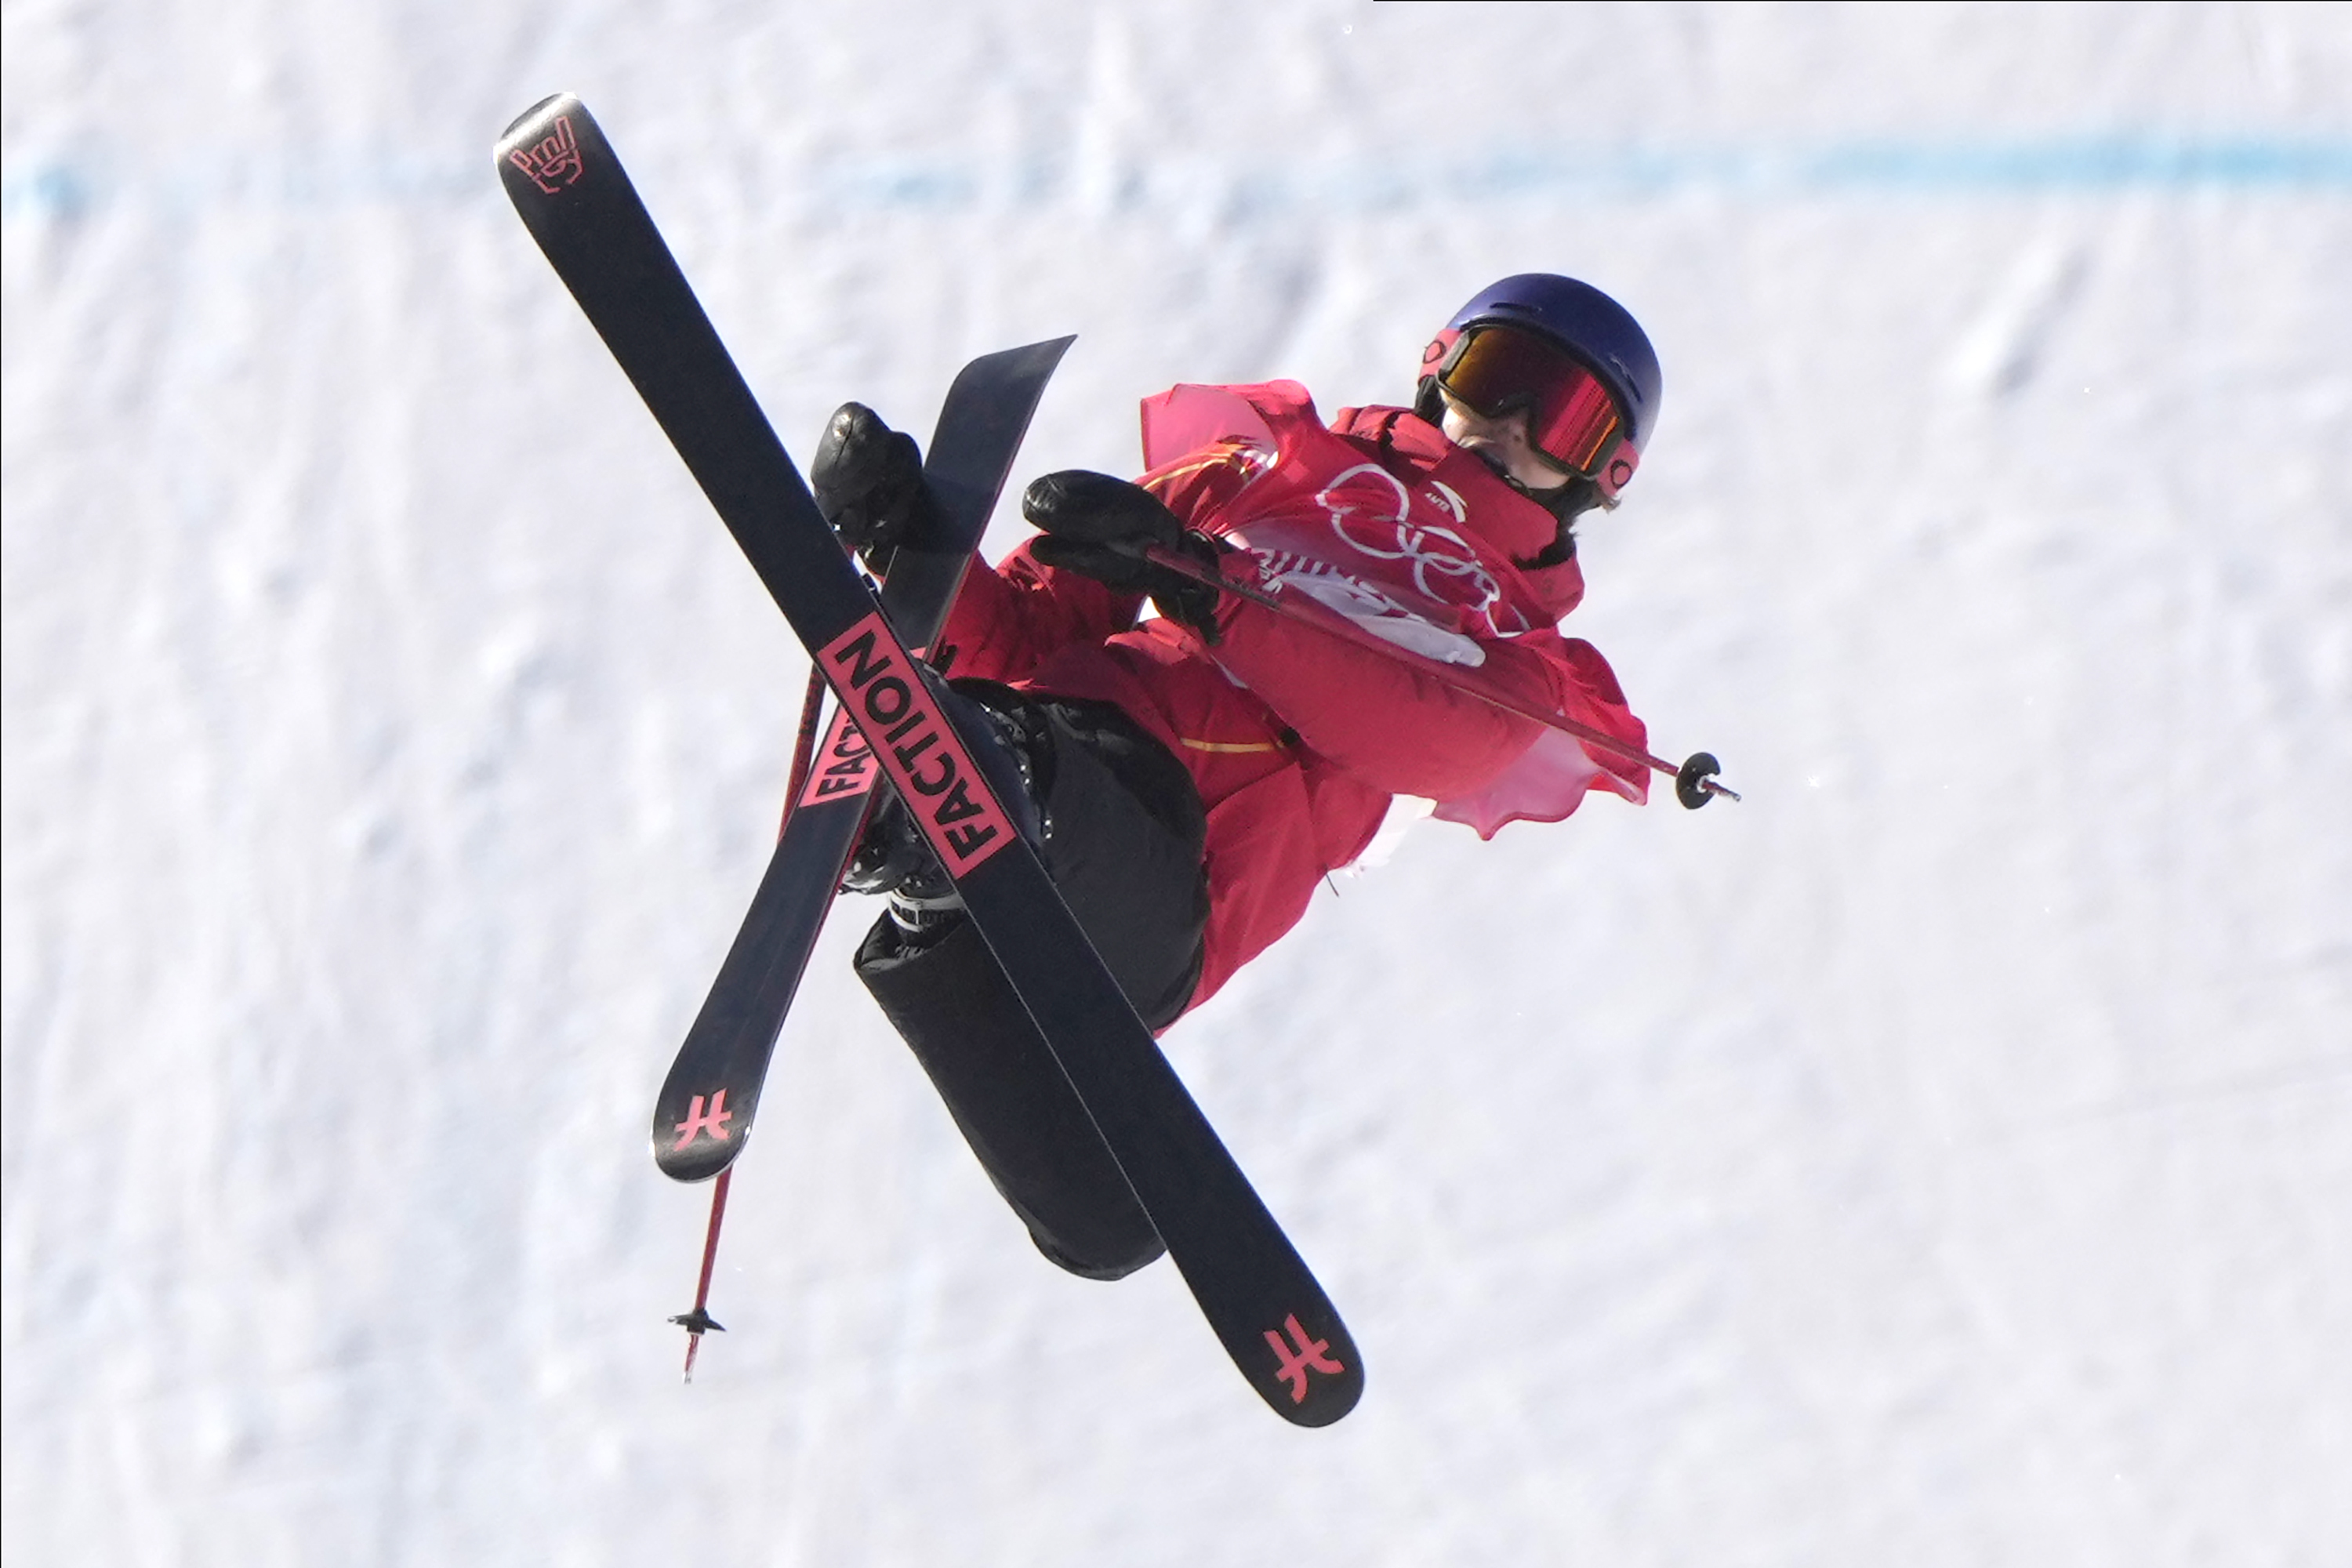 Freestyle skier Eileen Gu's star continuing to rise at Beijing Games